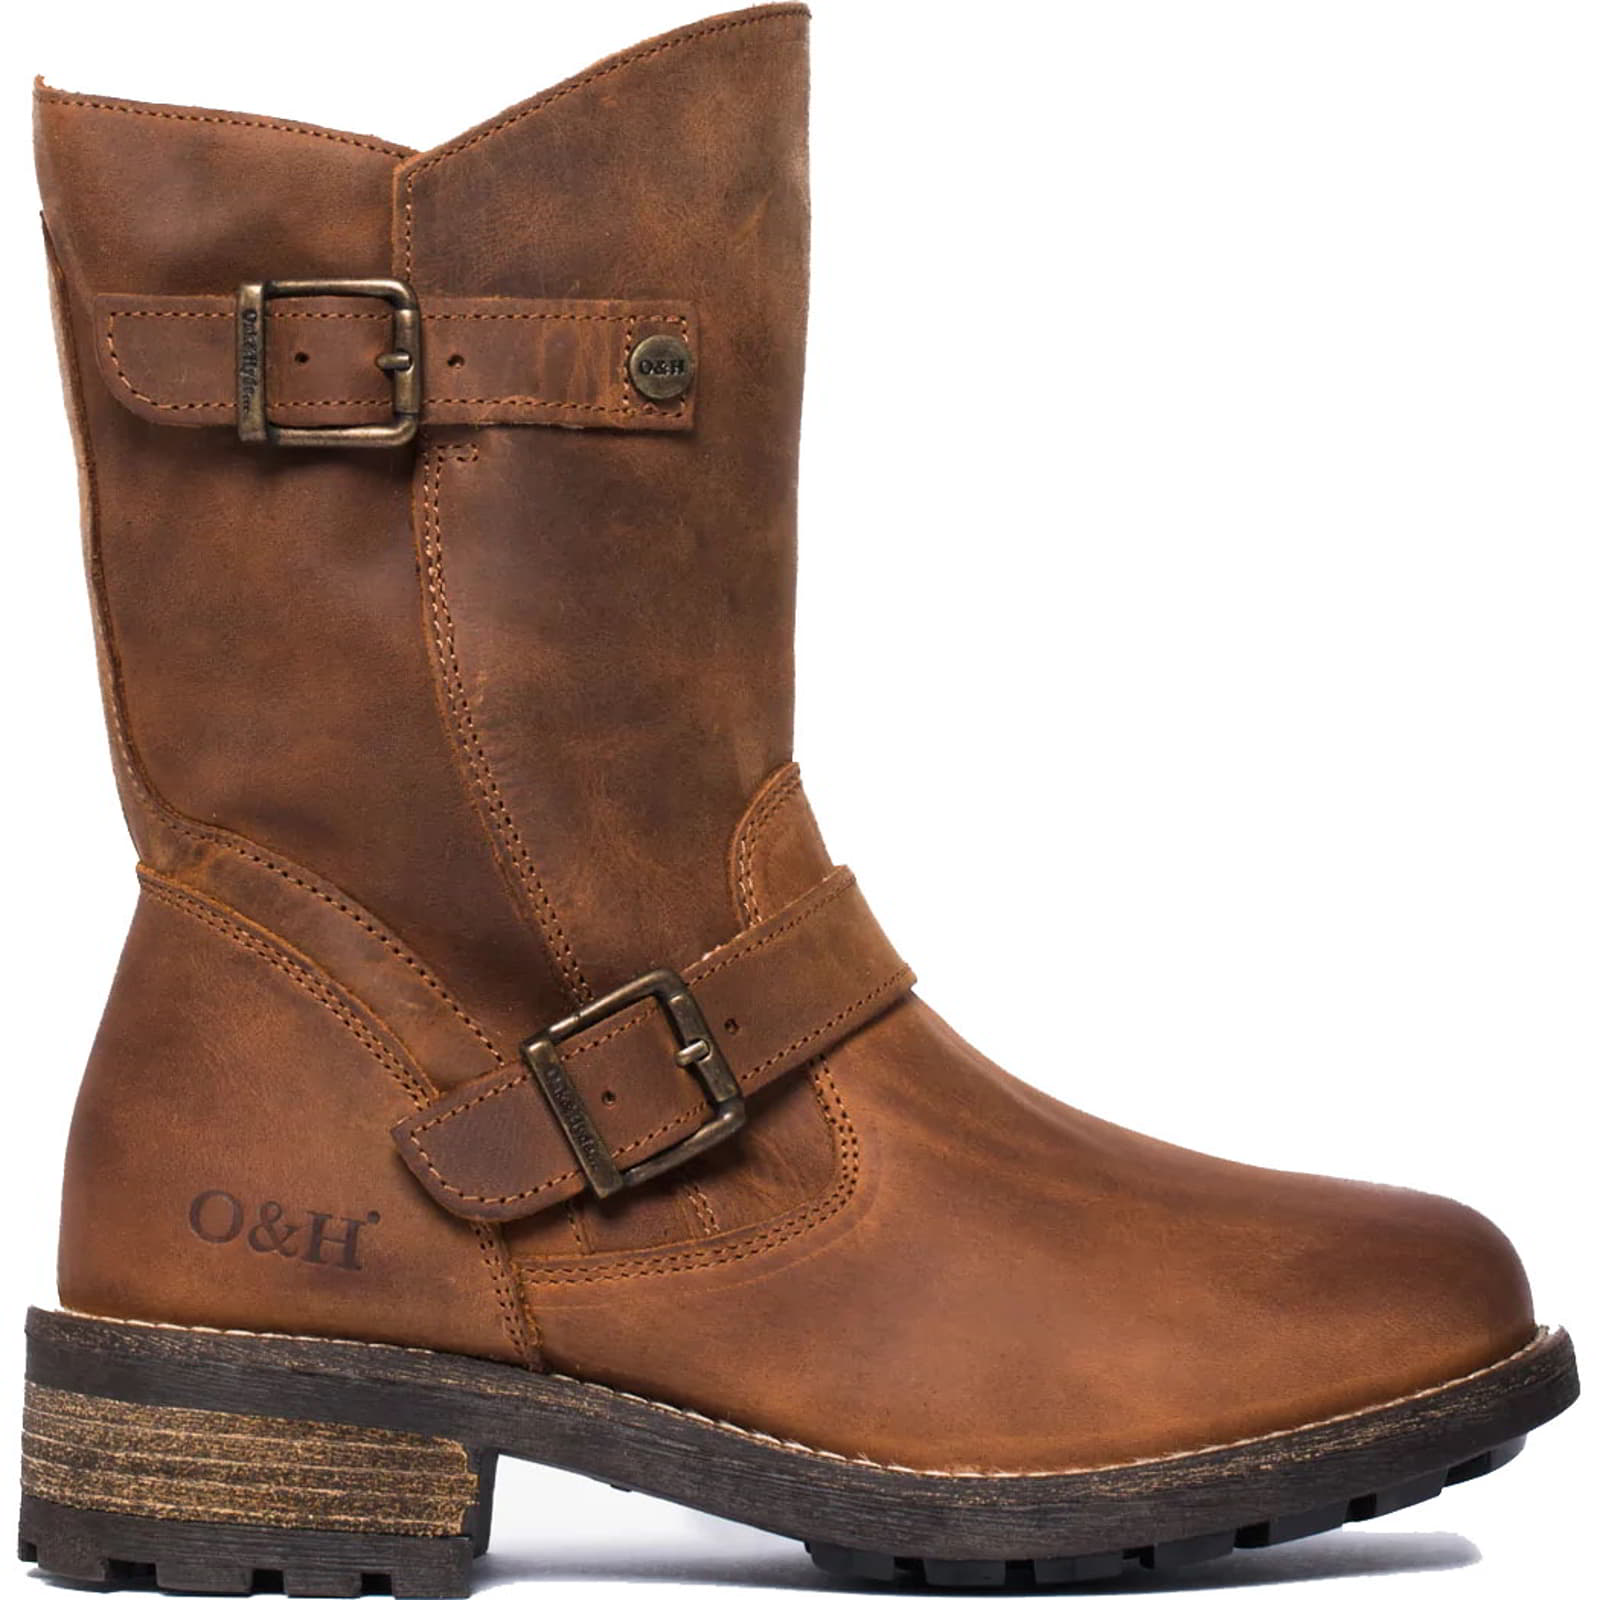 Womens Crest Demi Mid Calf Country Boots - Cognac